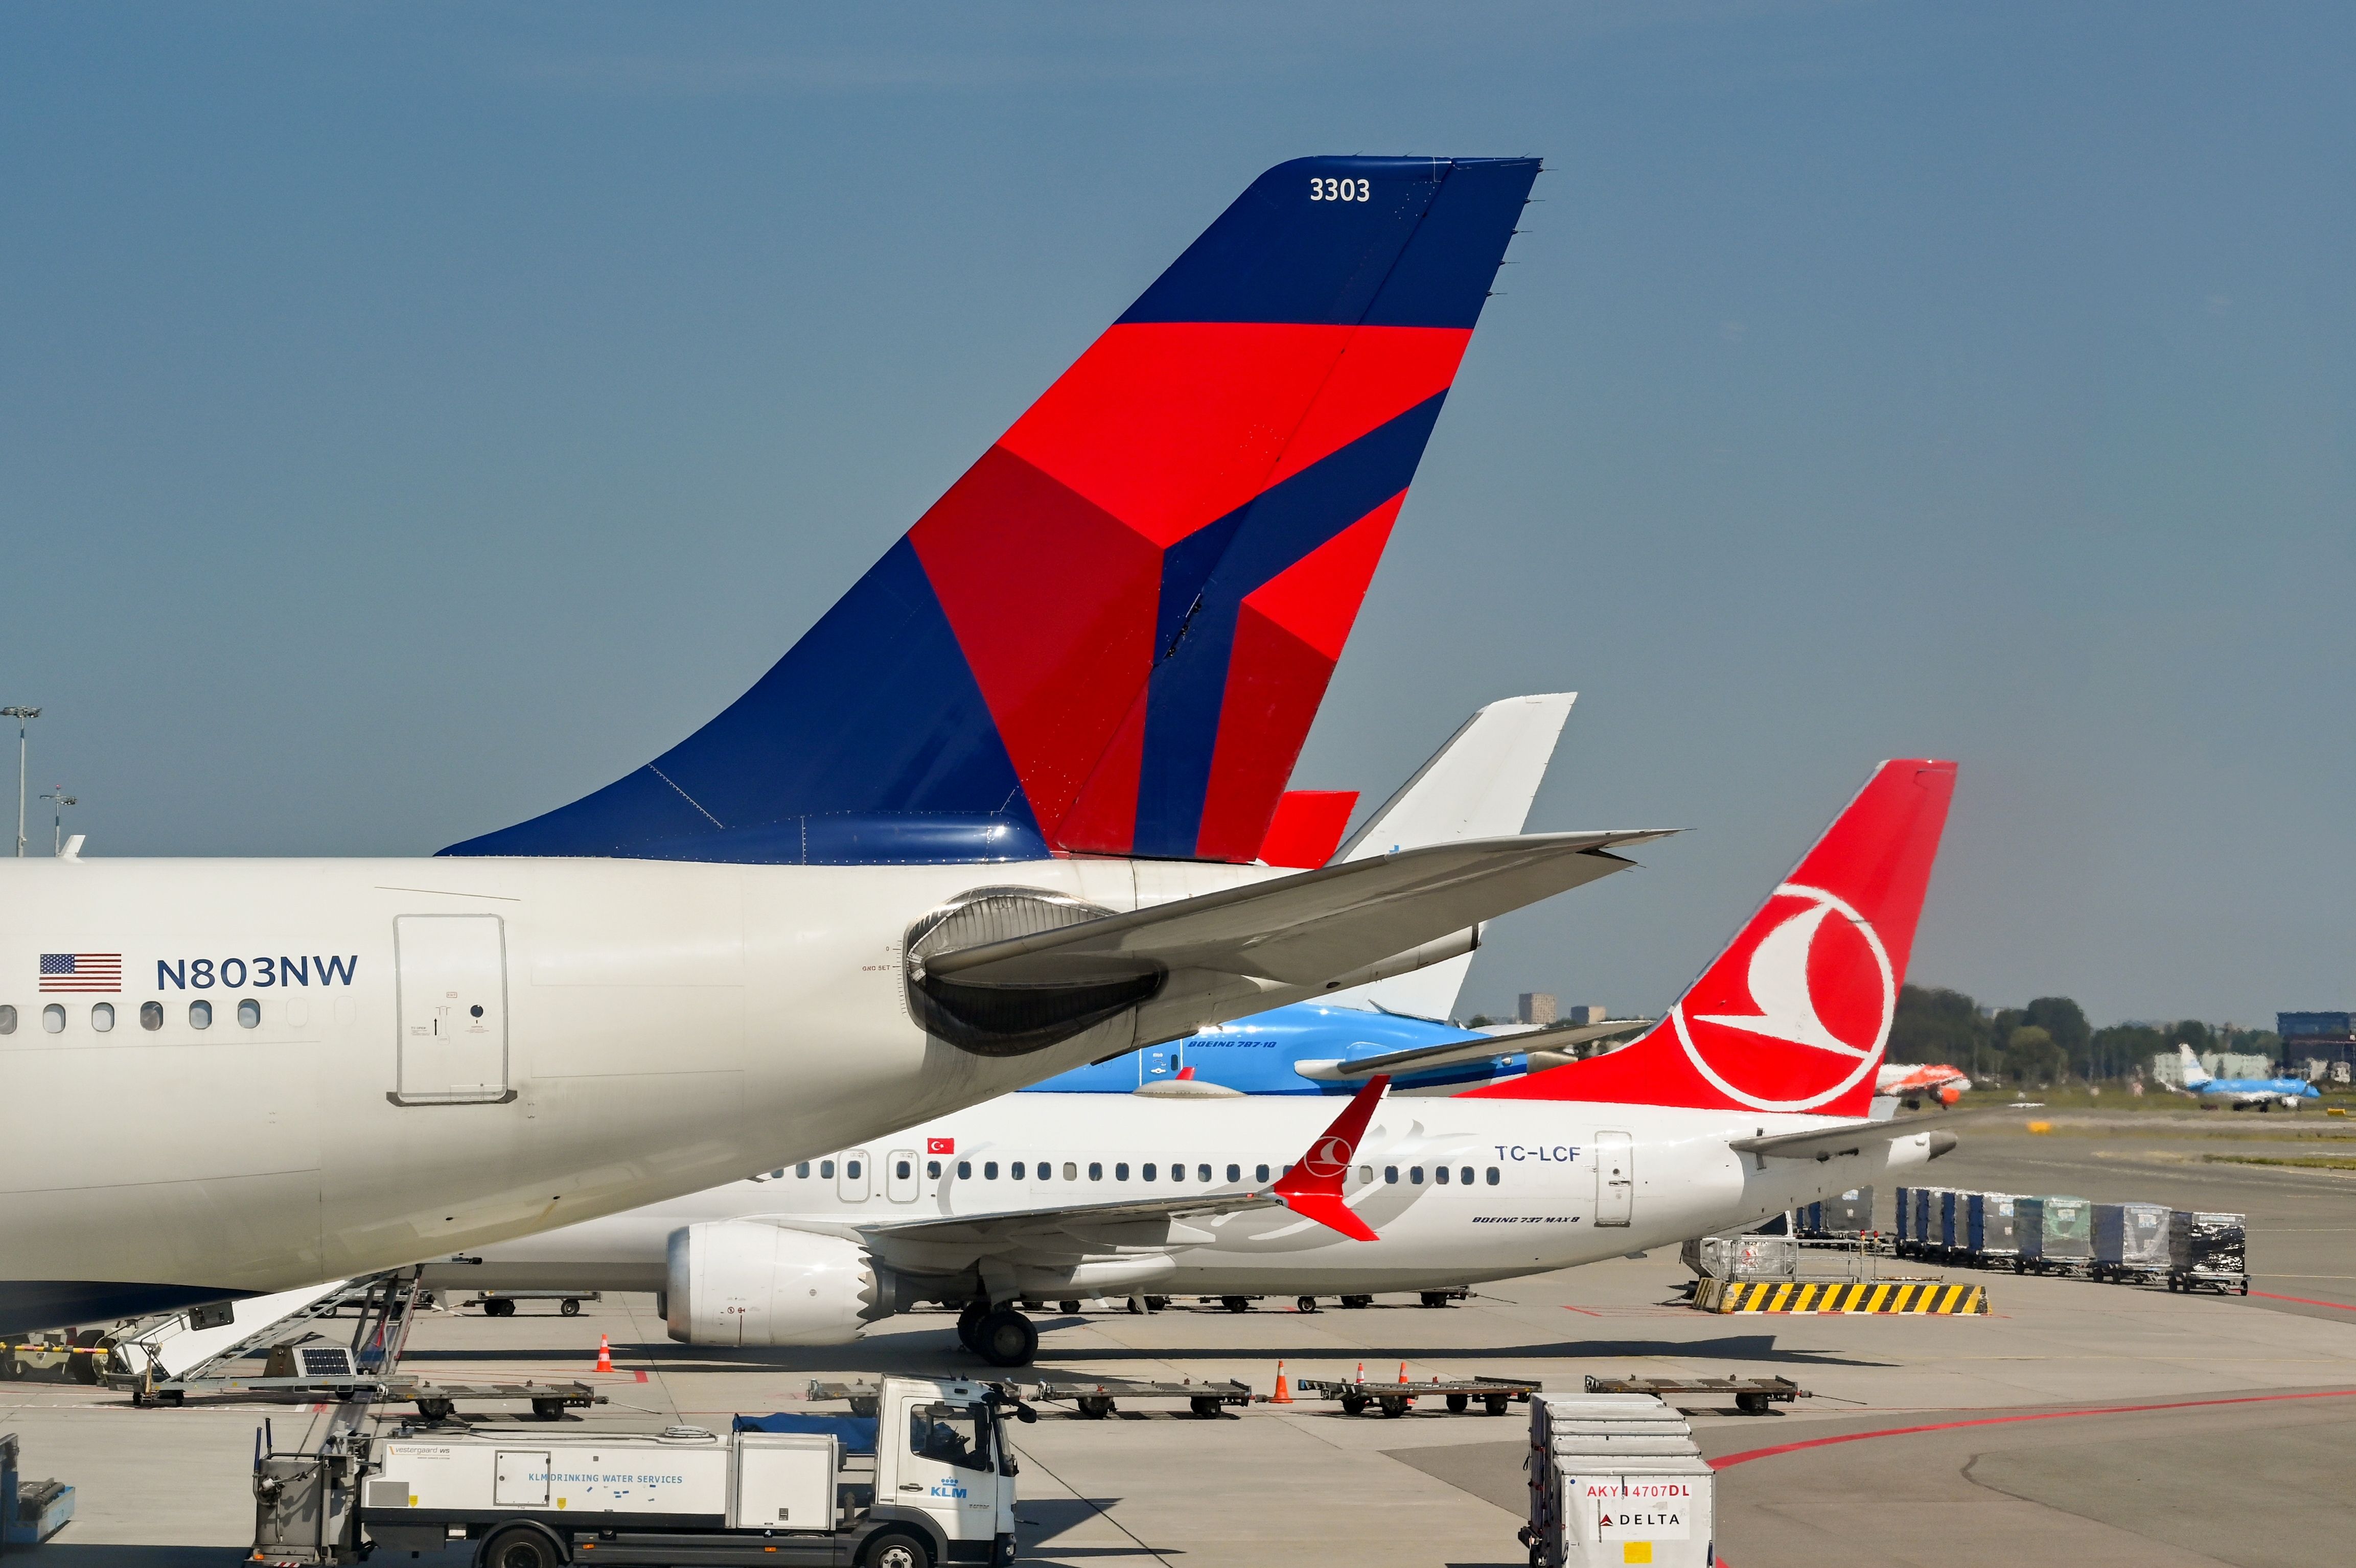 Delta Air Lines at Amsterdam Schiphol Airport